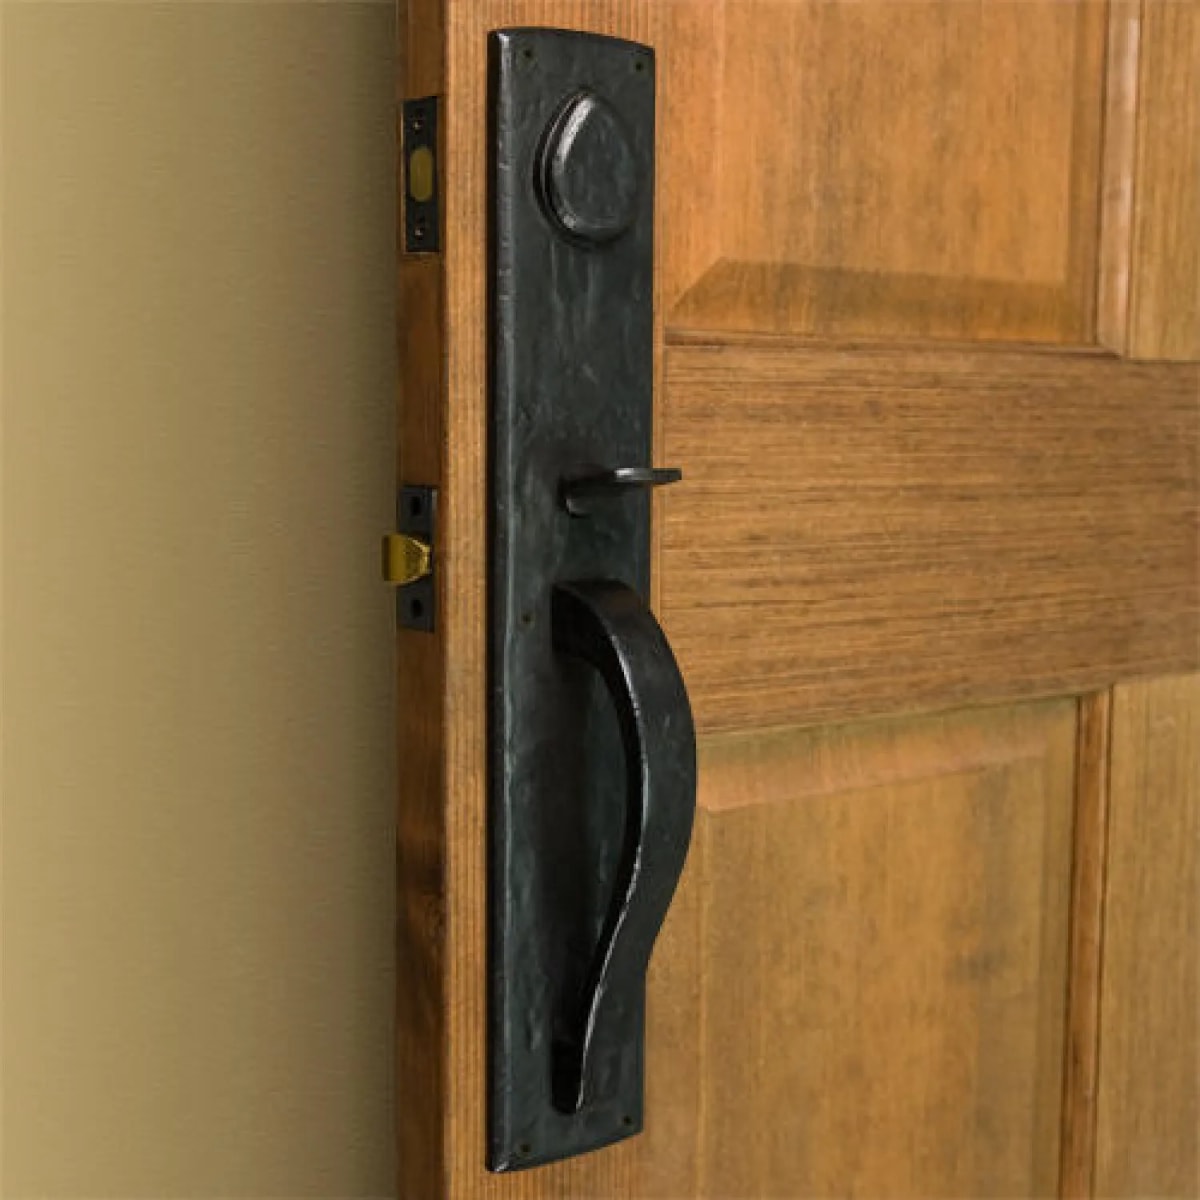 How to Change the Backset on a Door Latch 